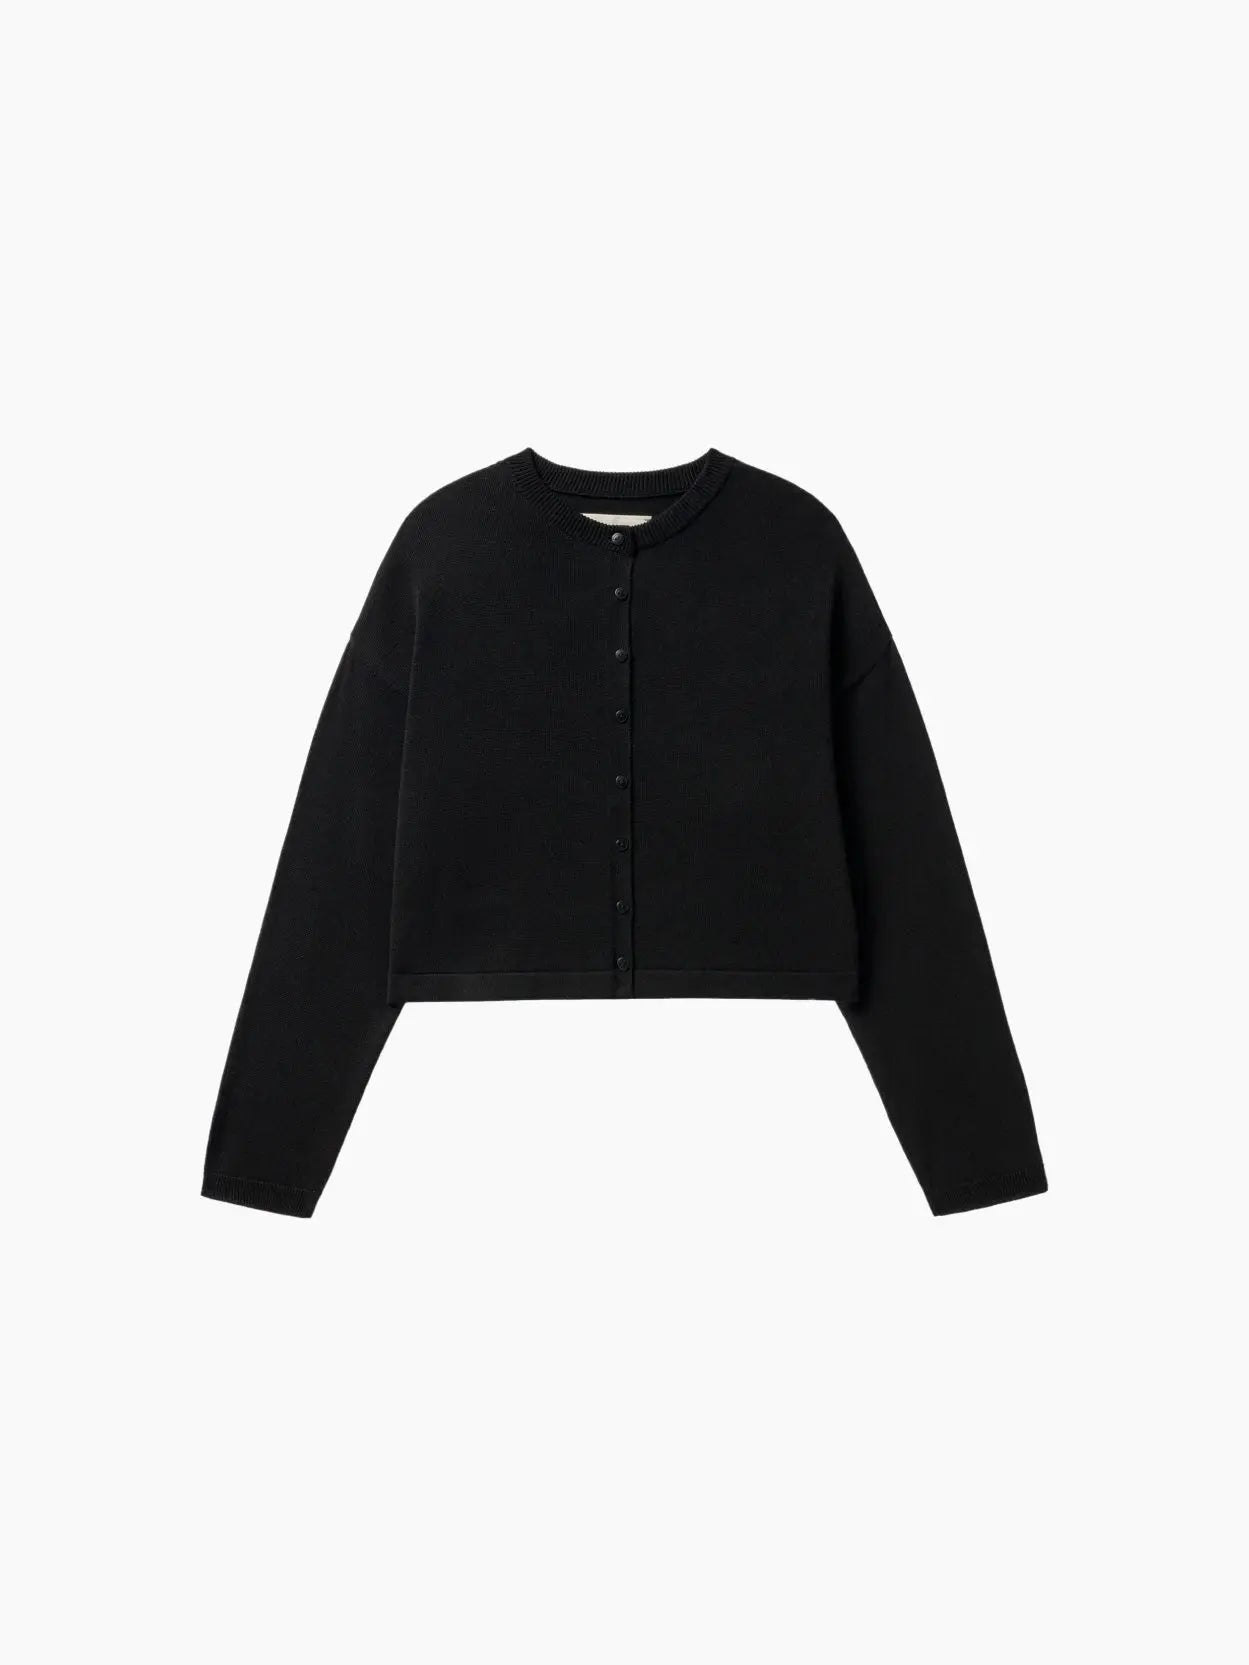 A Cordera Cotton Cropped Cardigan Black with a round neckline and button-down front. The slightly cropped, minimalist design is laid flat against a white background, available exclusively at Bassal Store in Barcelona.